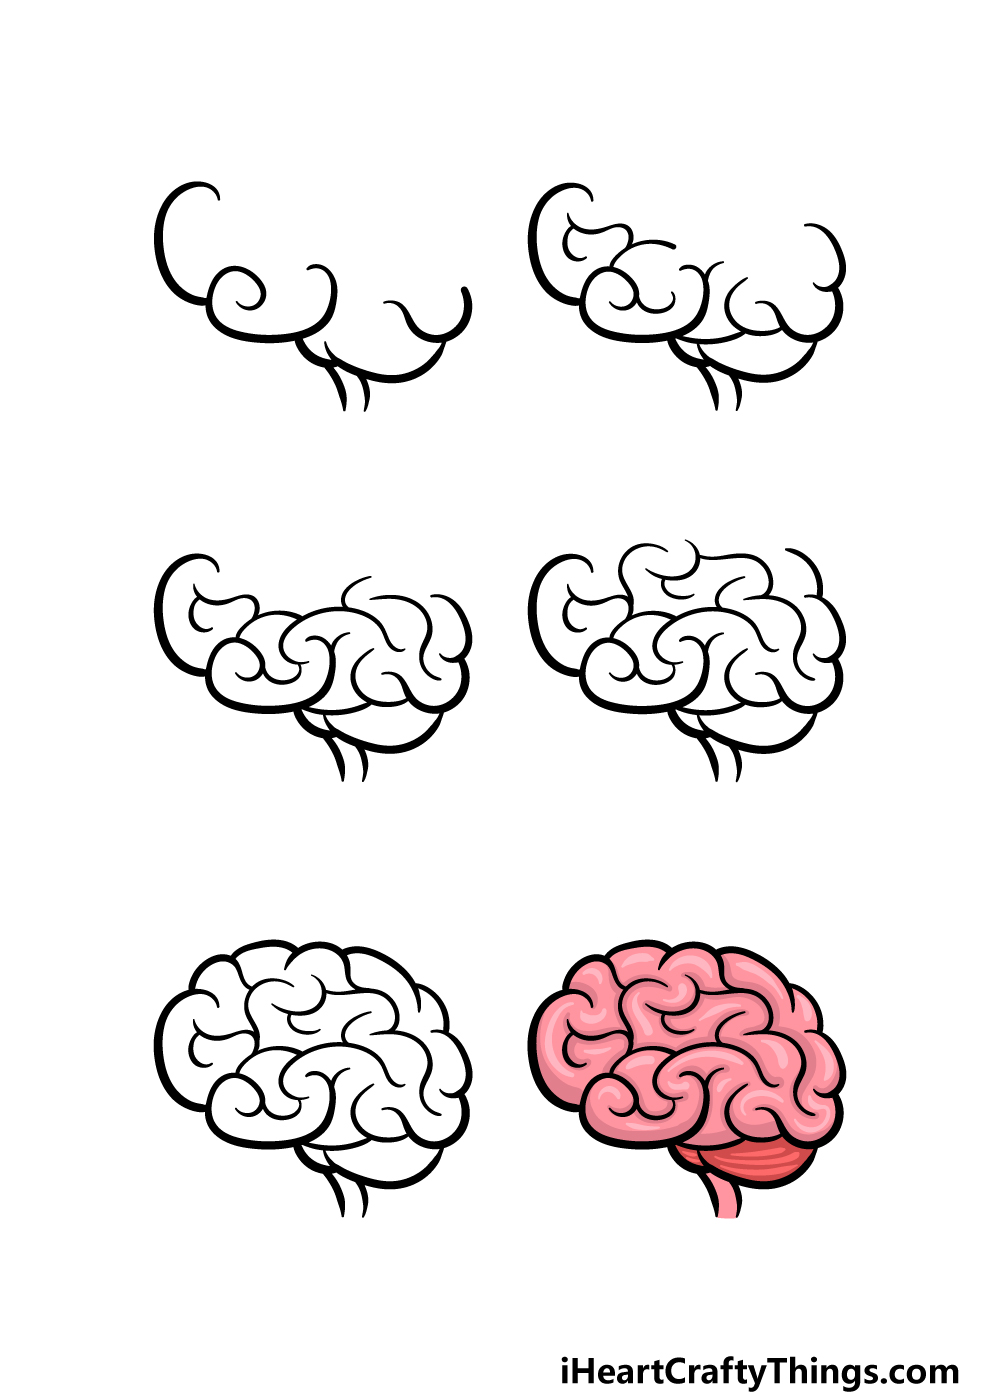 how to draw a cartoon brain in 6 steps